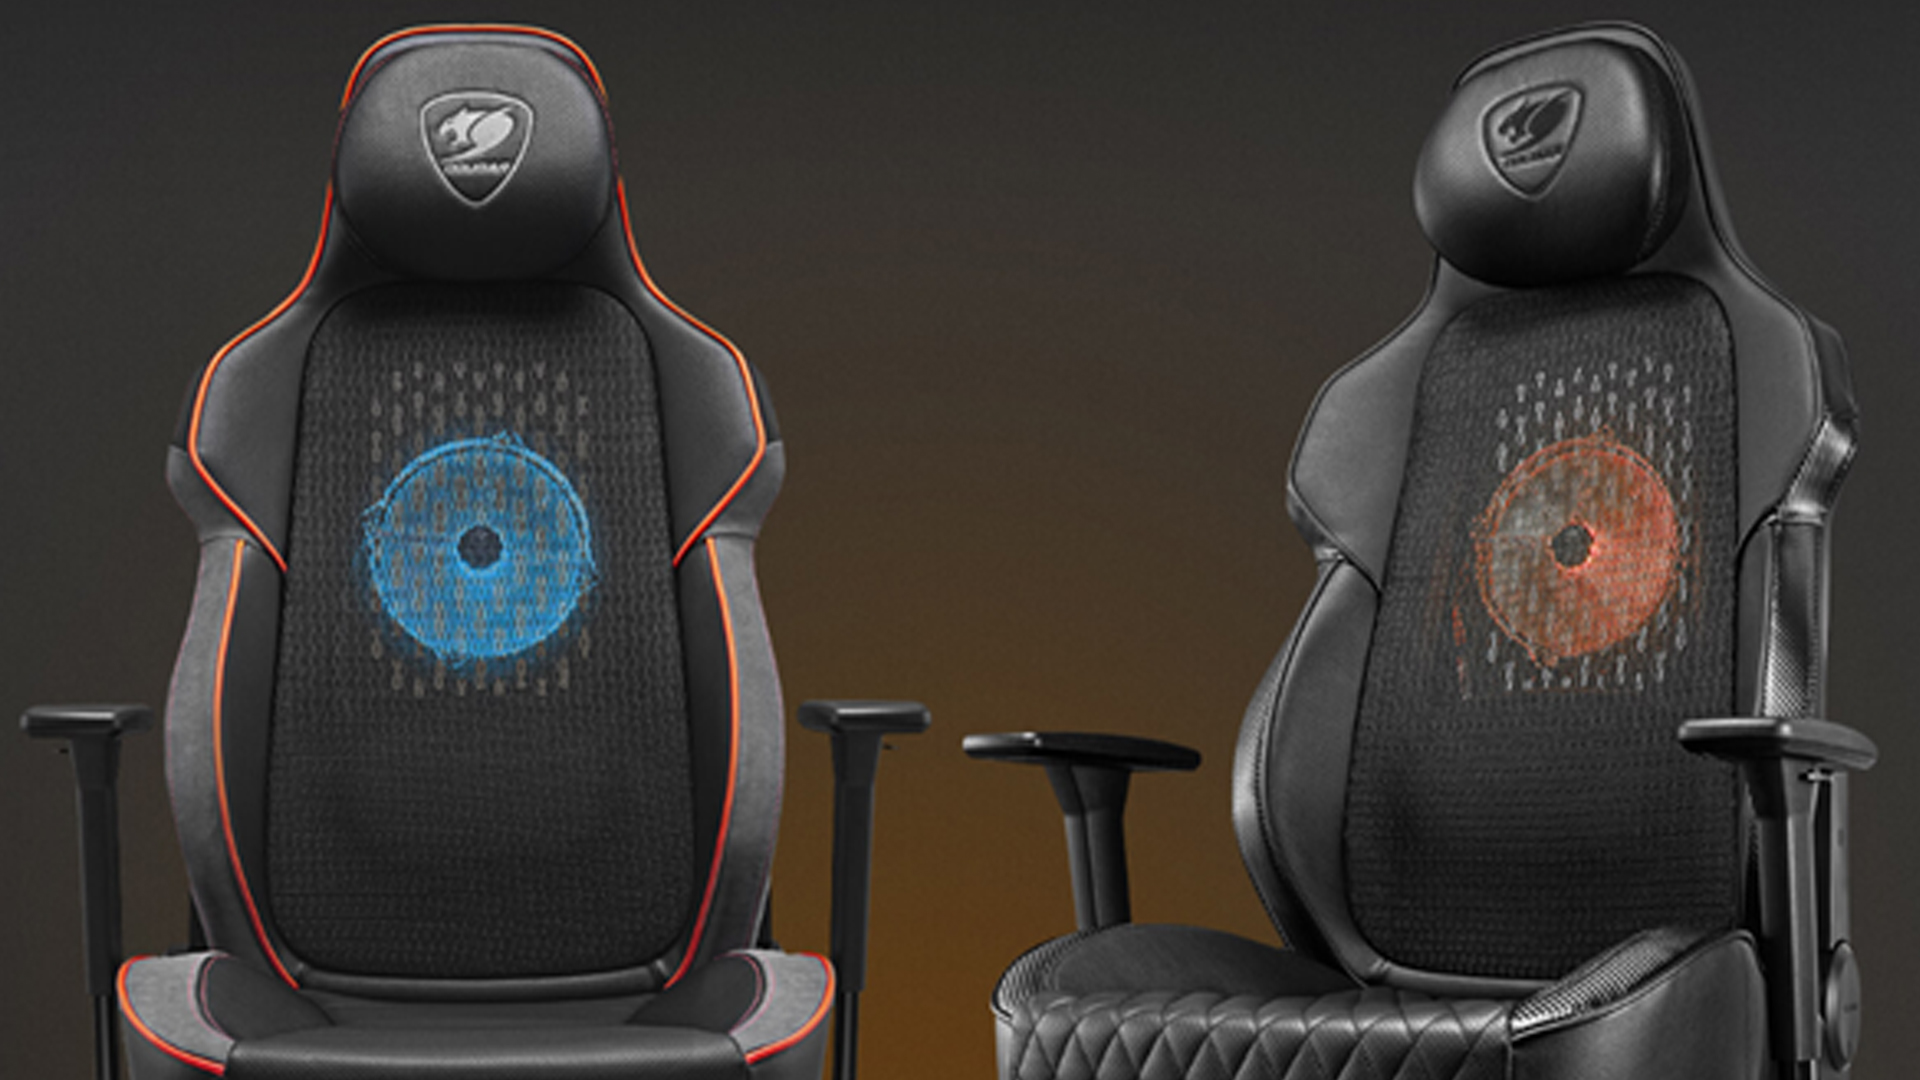 Cool down with this Cougar NxSys Aero gaming chair